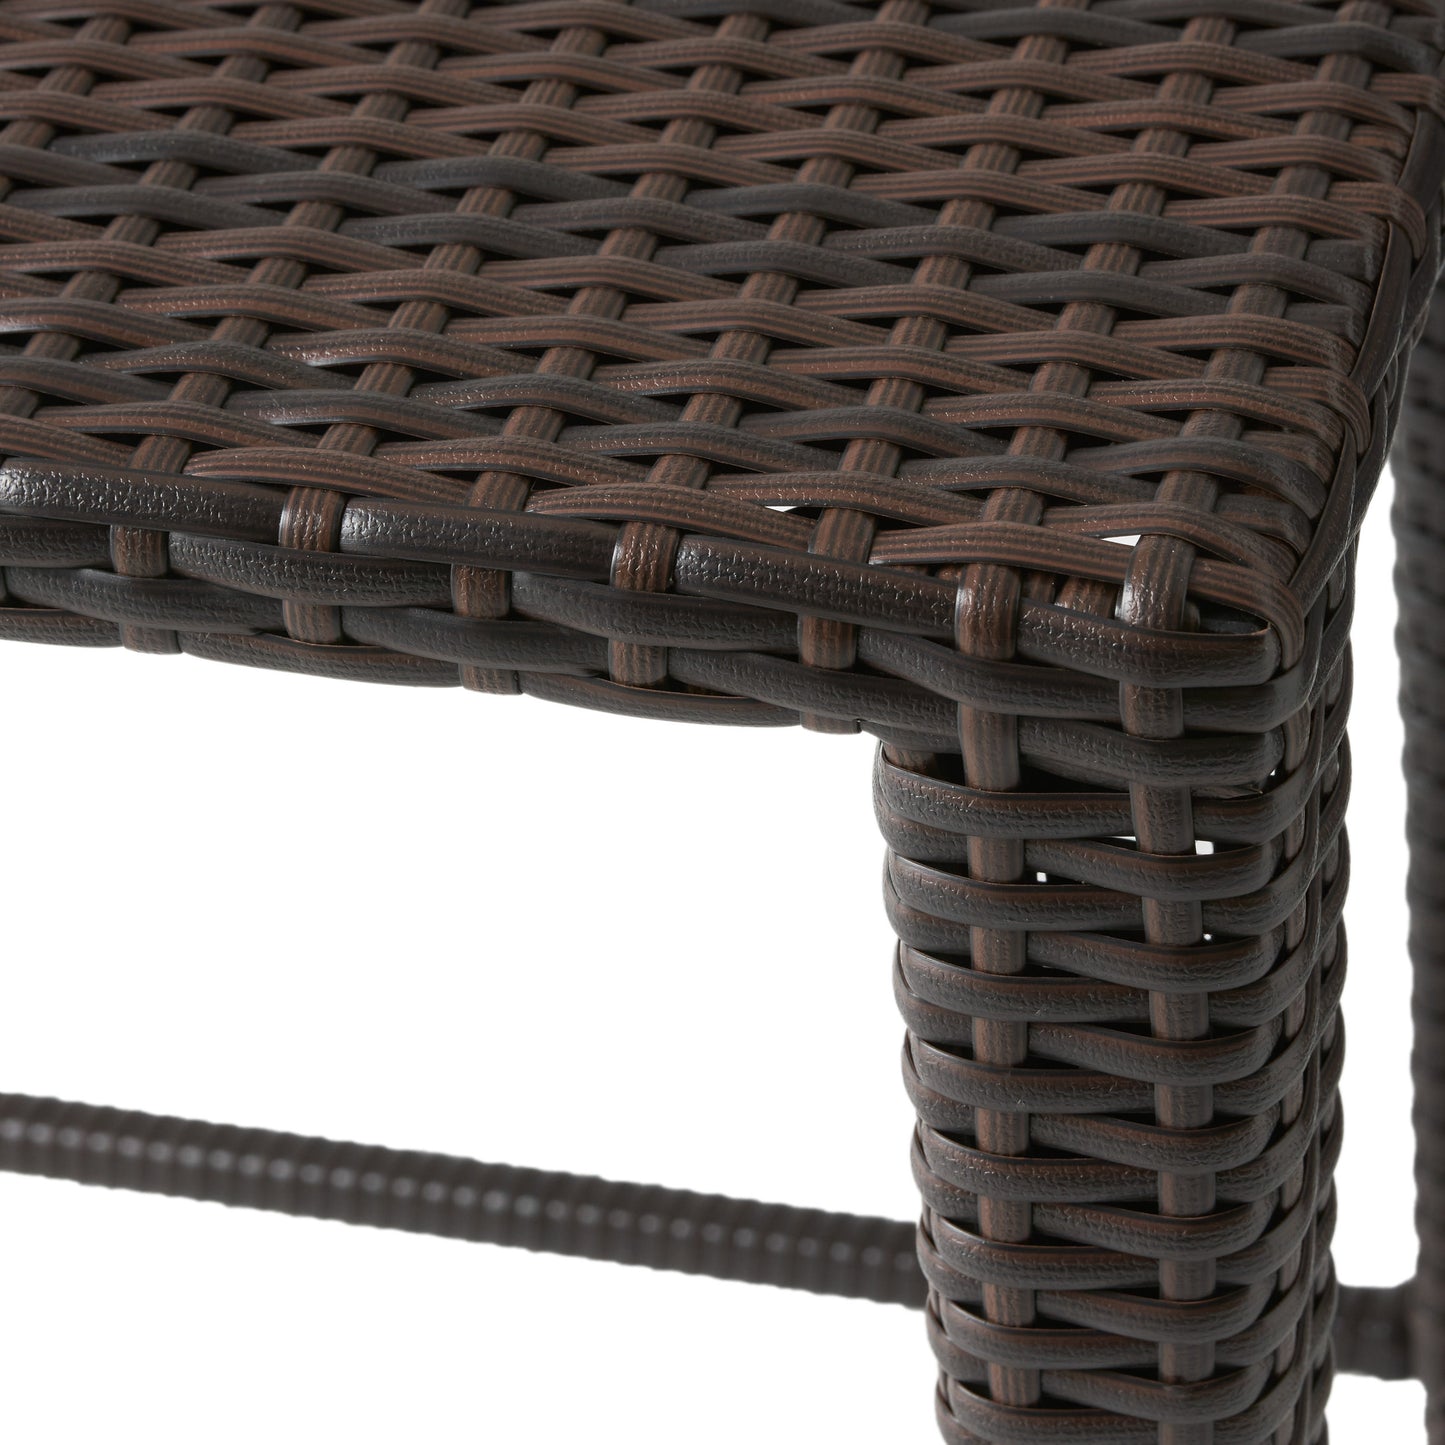 Mayall Multibrown Wicker Nested Side Tables (Set of 3)